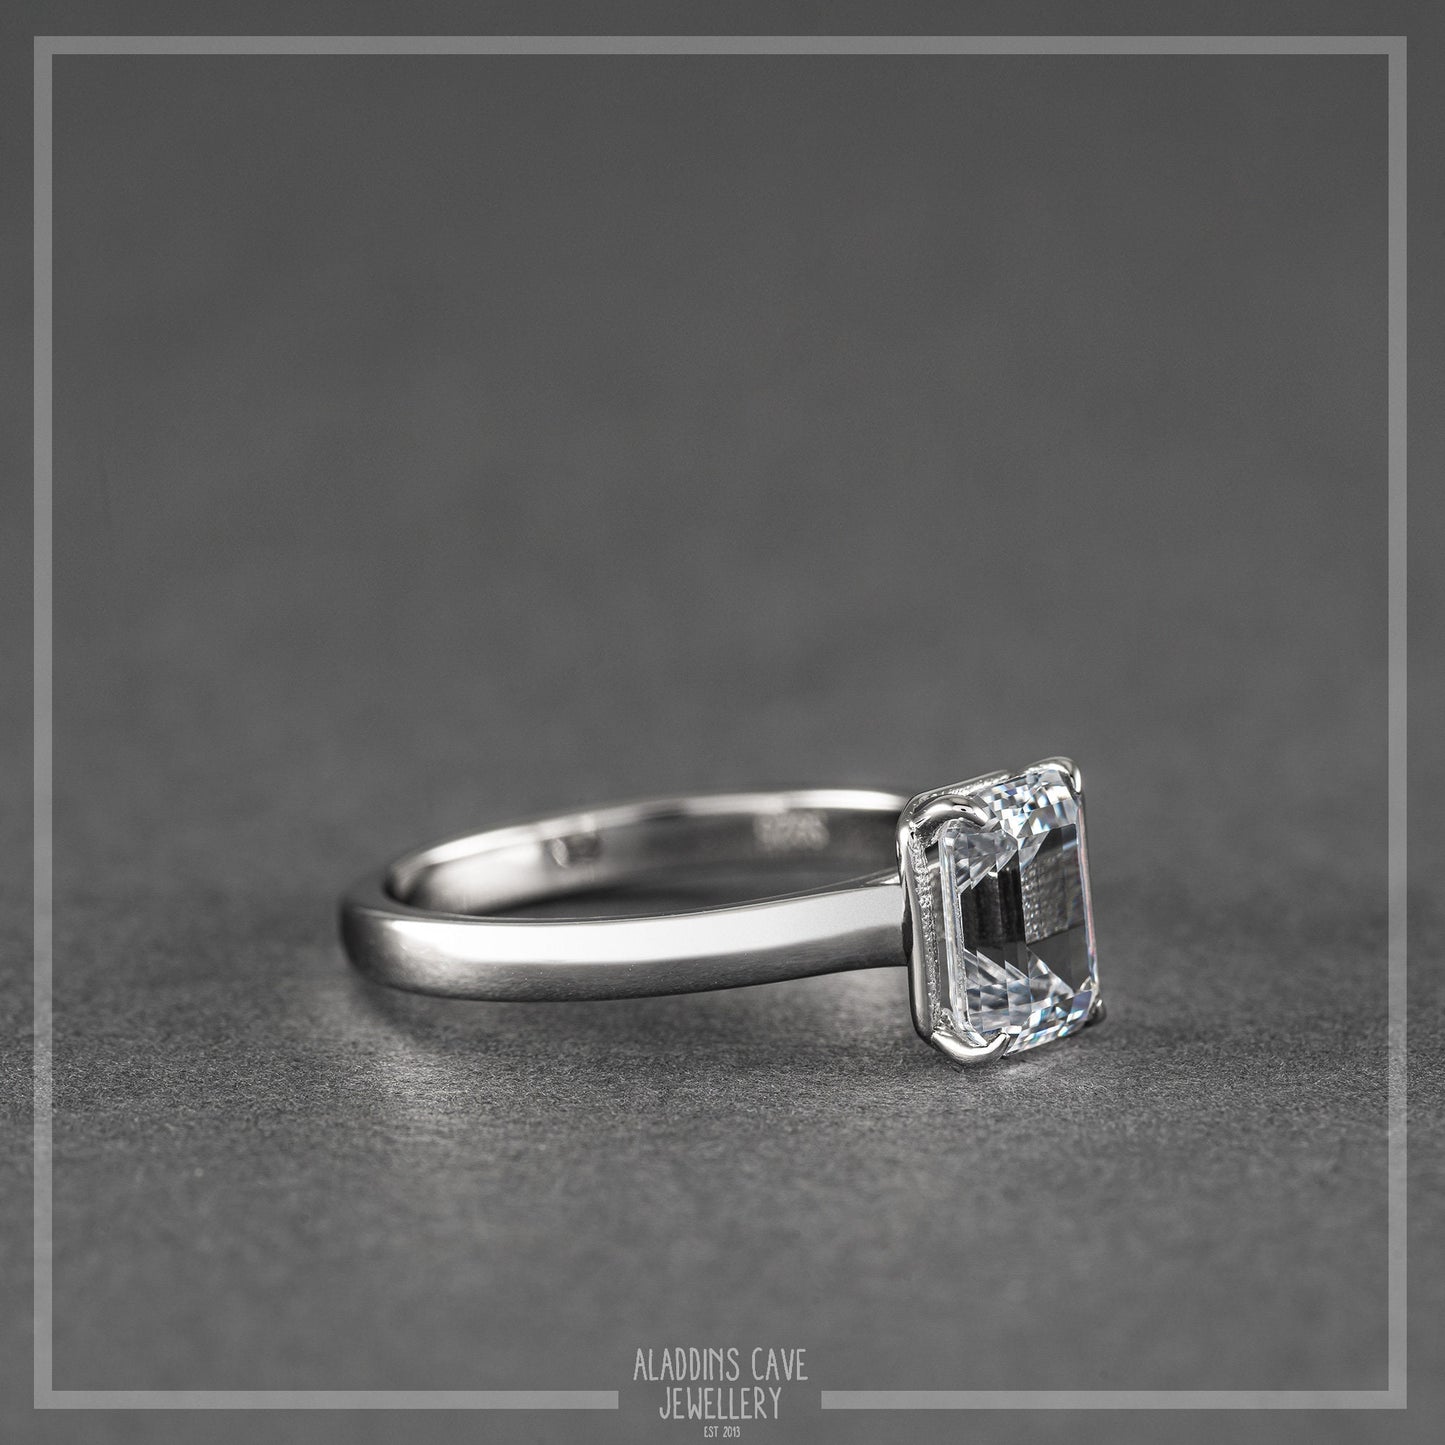 1.9ct Emerald cut man made diamond solitaire ring available in Sterling Silver or White Gold Filled - engagement ring